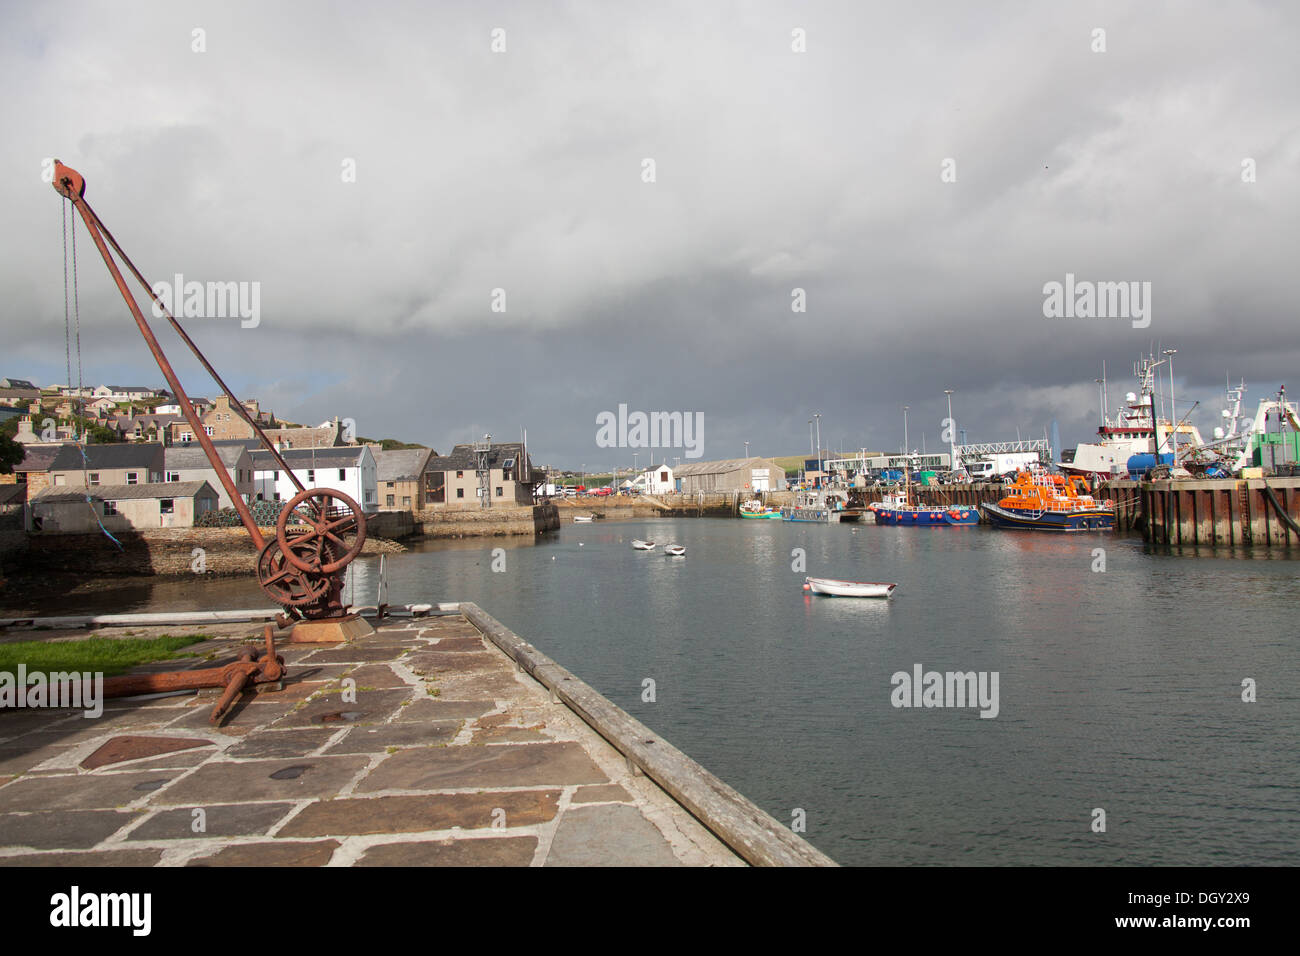 Islands of Orkney, Scotland. Fisherman’s cottages on Stromness’s waterfront, with the harbour in the background. Stock Photo